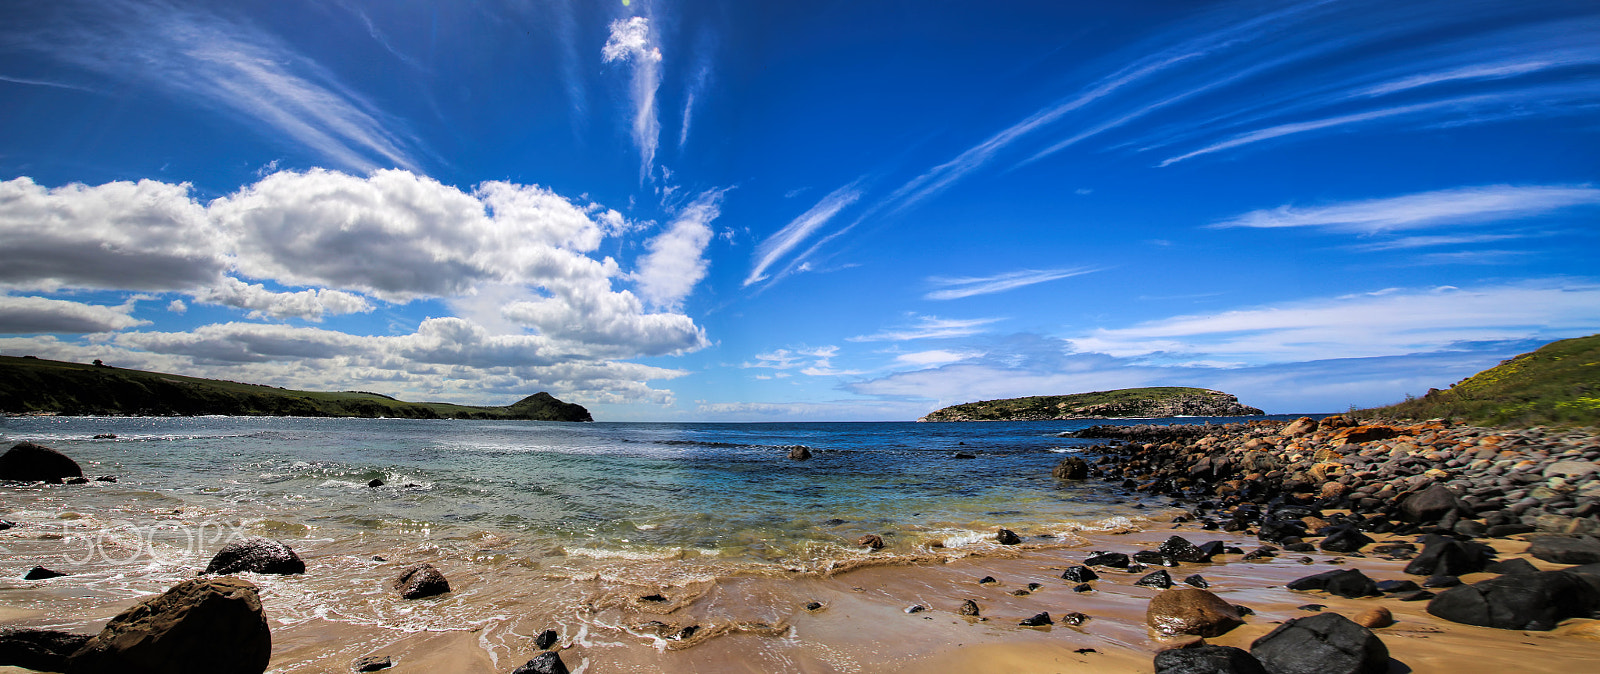 Canon EOS 6D + Sigma 24-105mm f/4 DG OS HSM | A sample photo. The bluff and west island photography